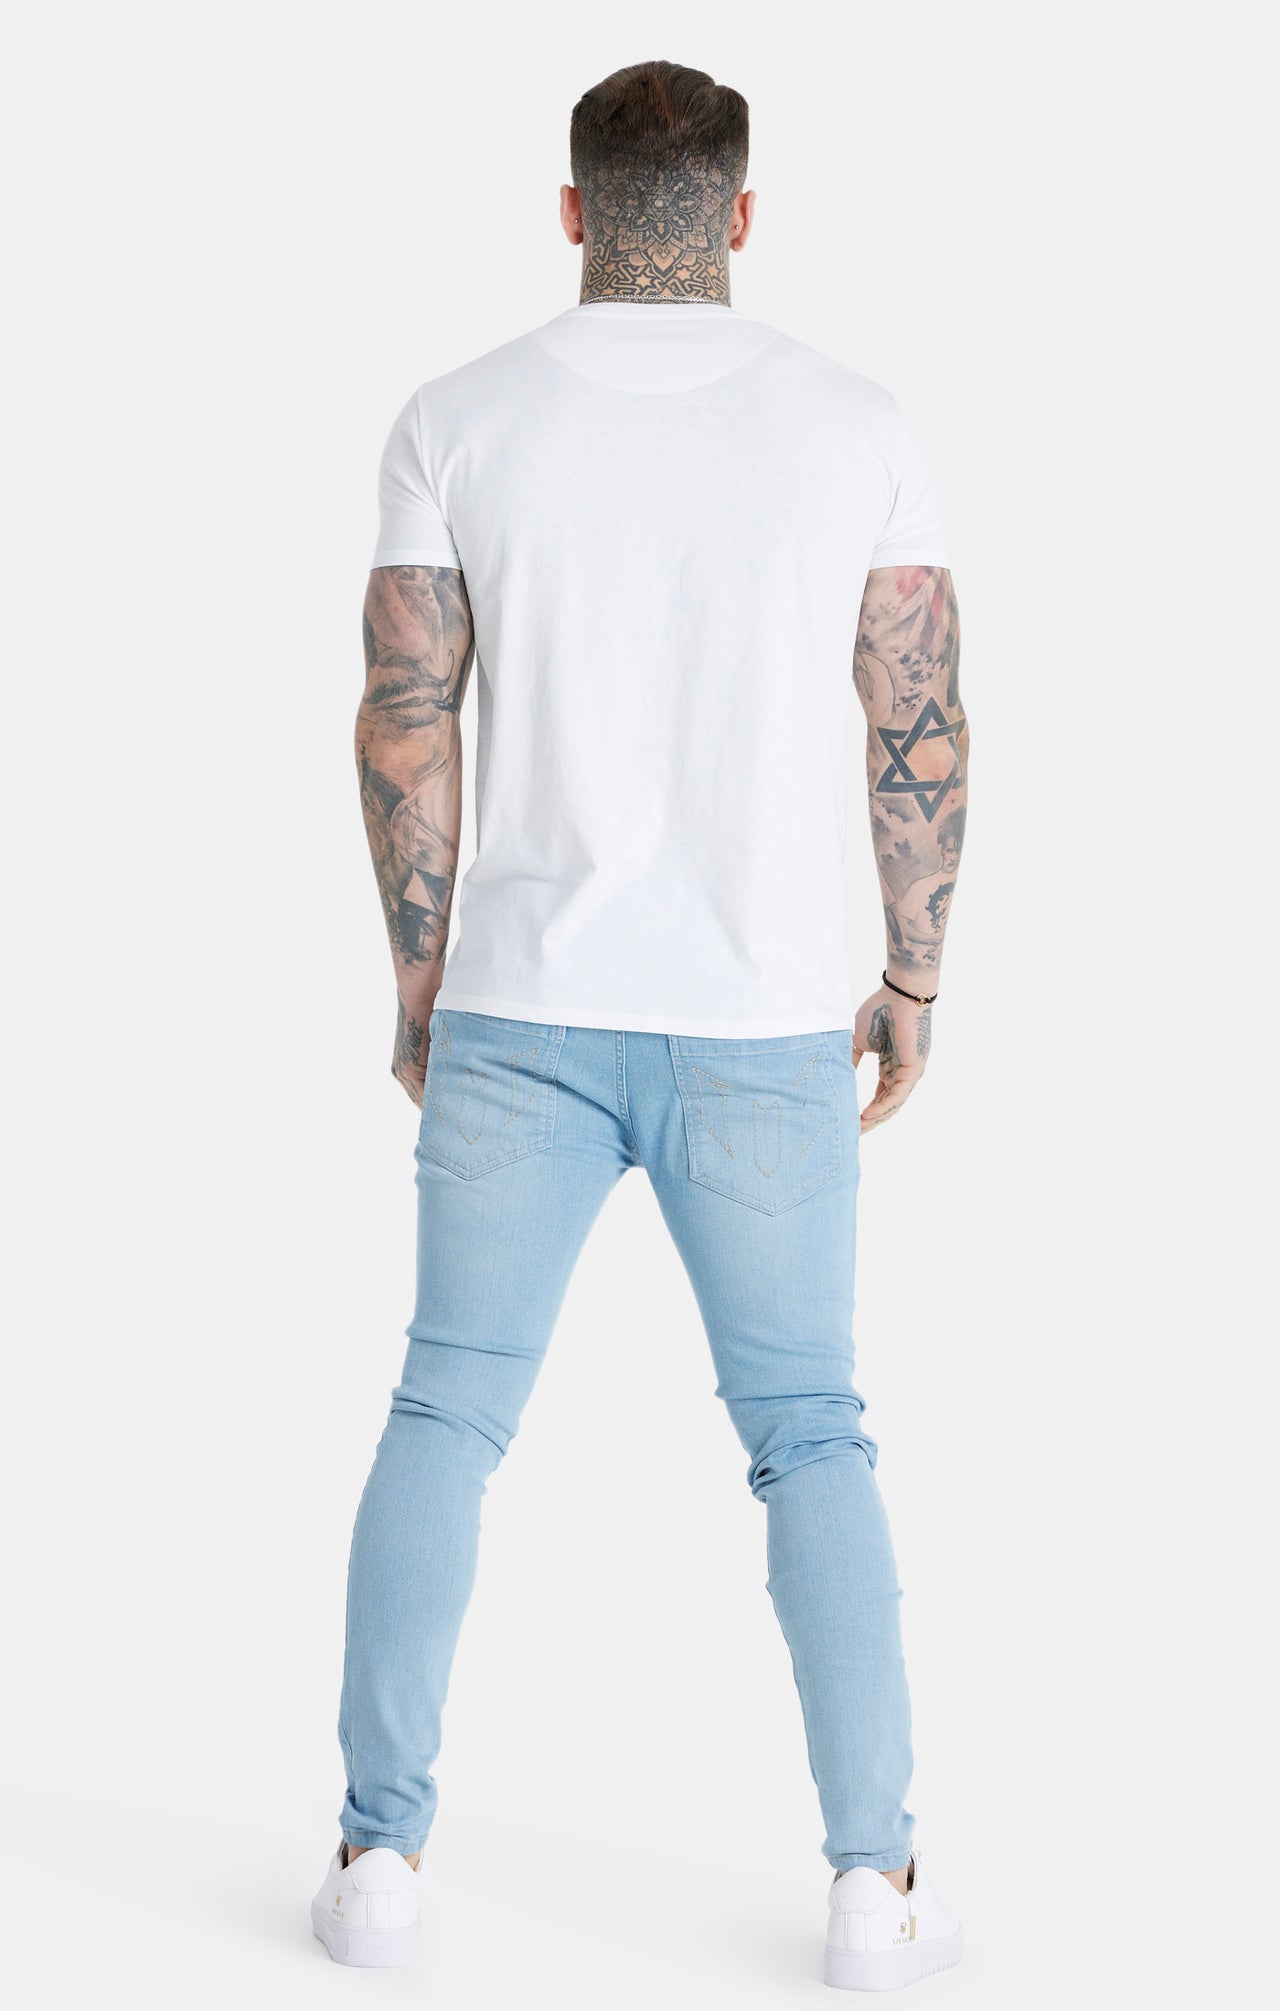 Messi x SikSilk White Muscle Fit T-Shirt (4)